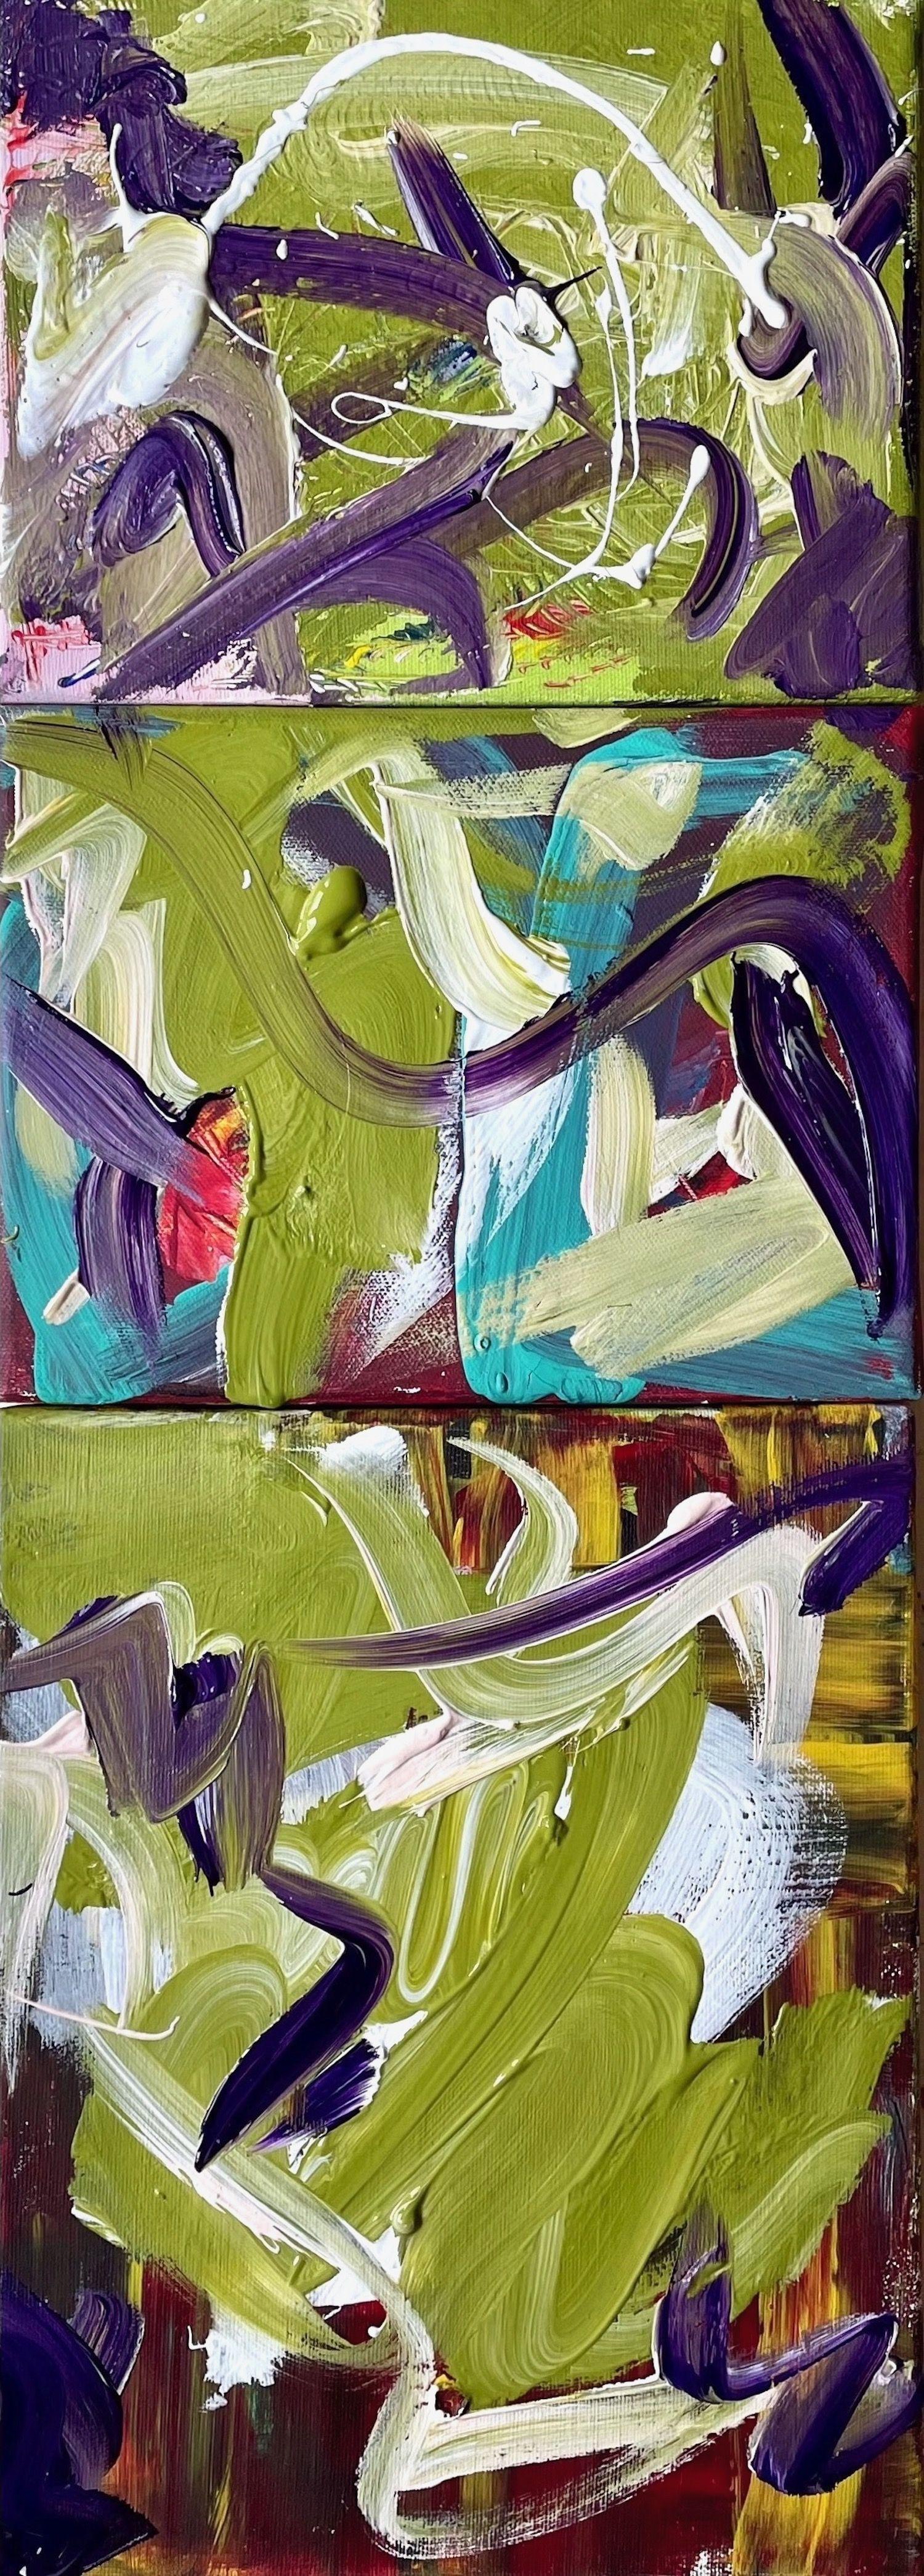 "In the Mood for Floating (Triptych)" is a gestural painted triptych in the colors green and purple as well as some white, black, turquoise and red on canvas. The three paintings can either be hung together, at a distance or each painting